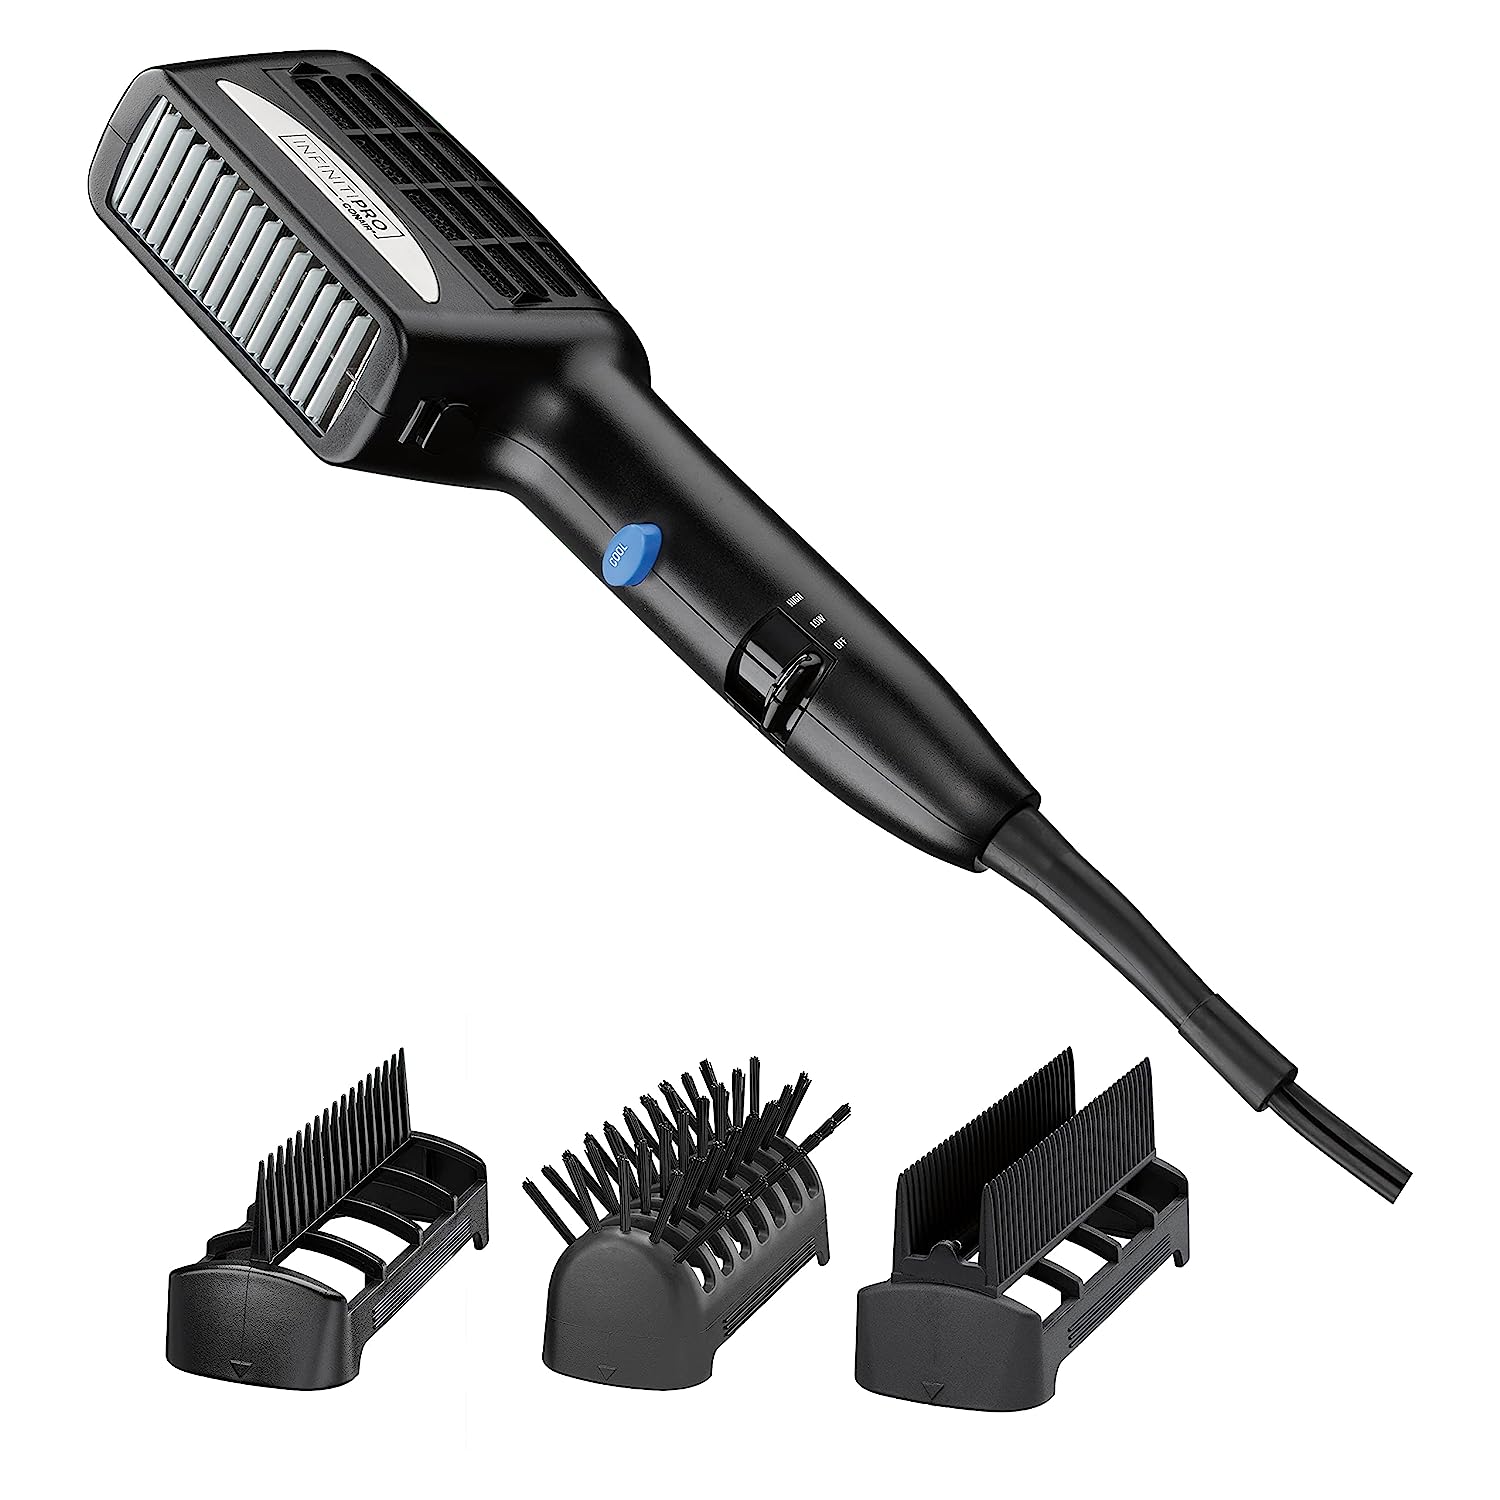 Review of INFINITIPRO BY CONAIR 3-in-1 Styling Hair Dryer, 1875W Hair Dryer